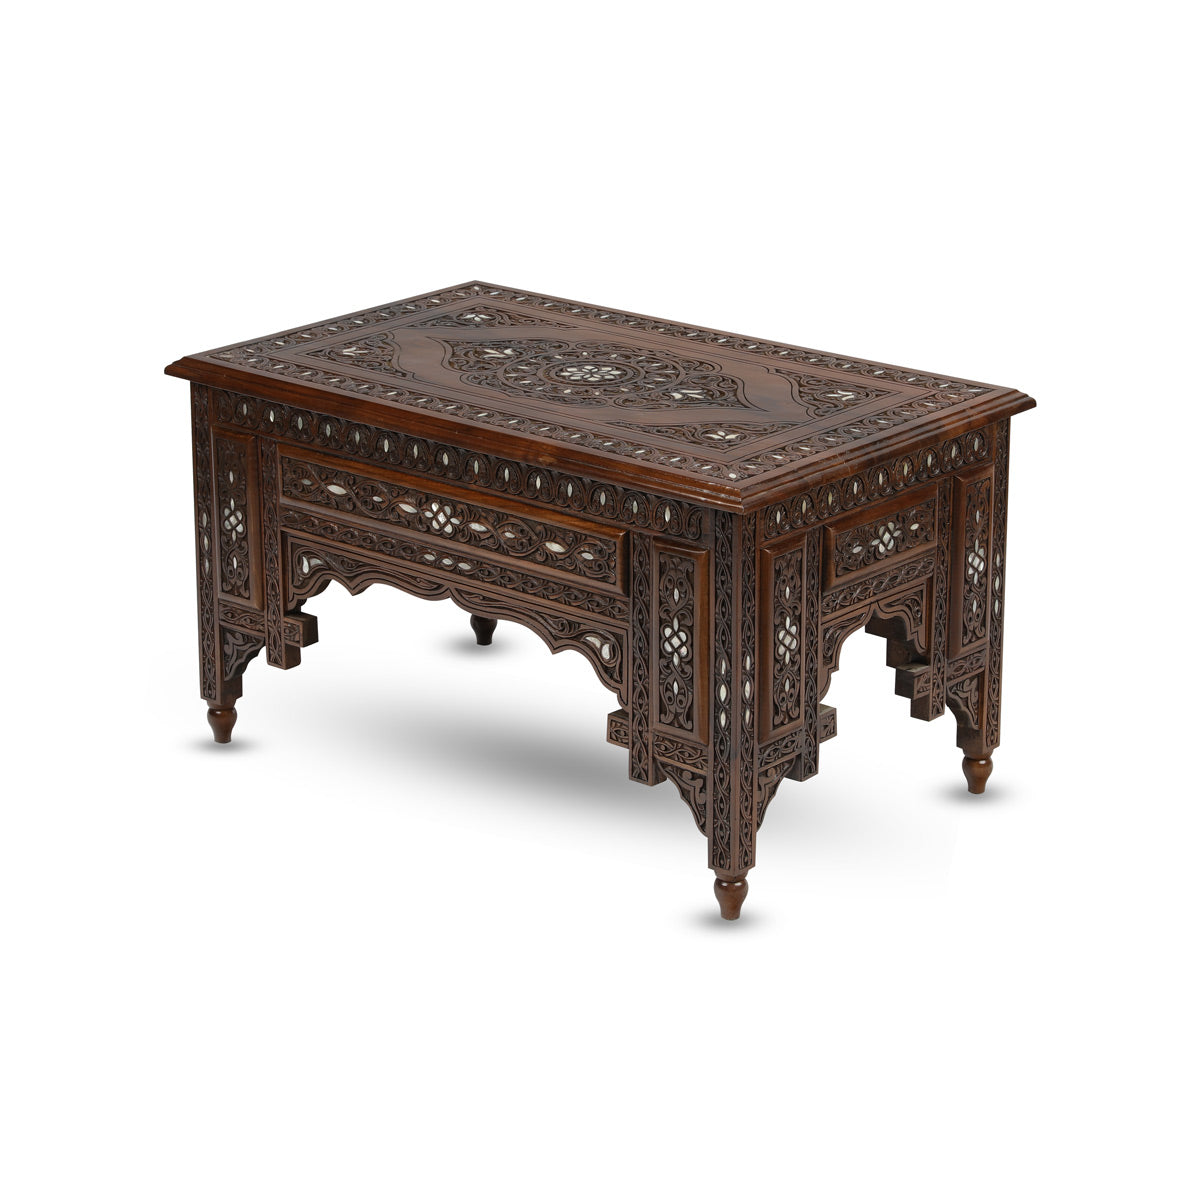 Angled Side View of Ornate Rectangular Table